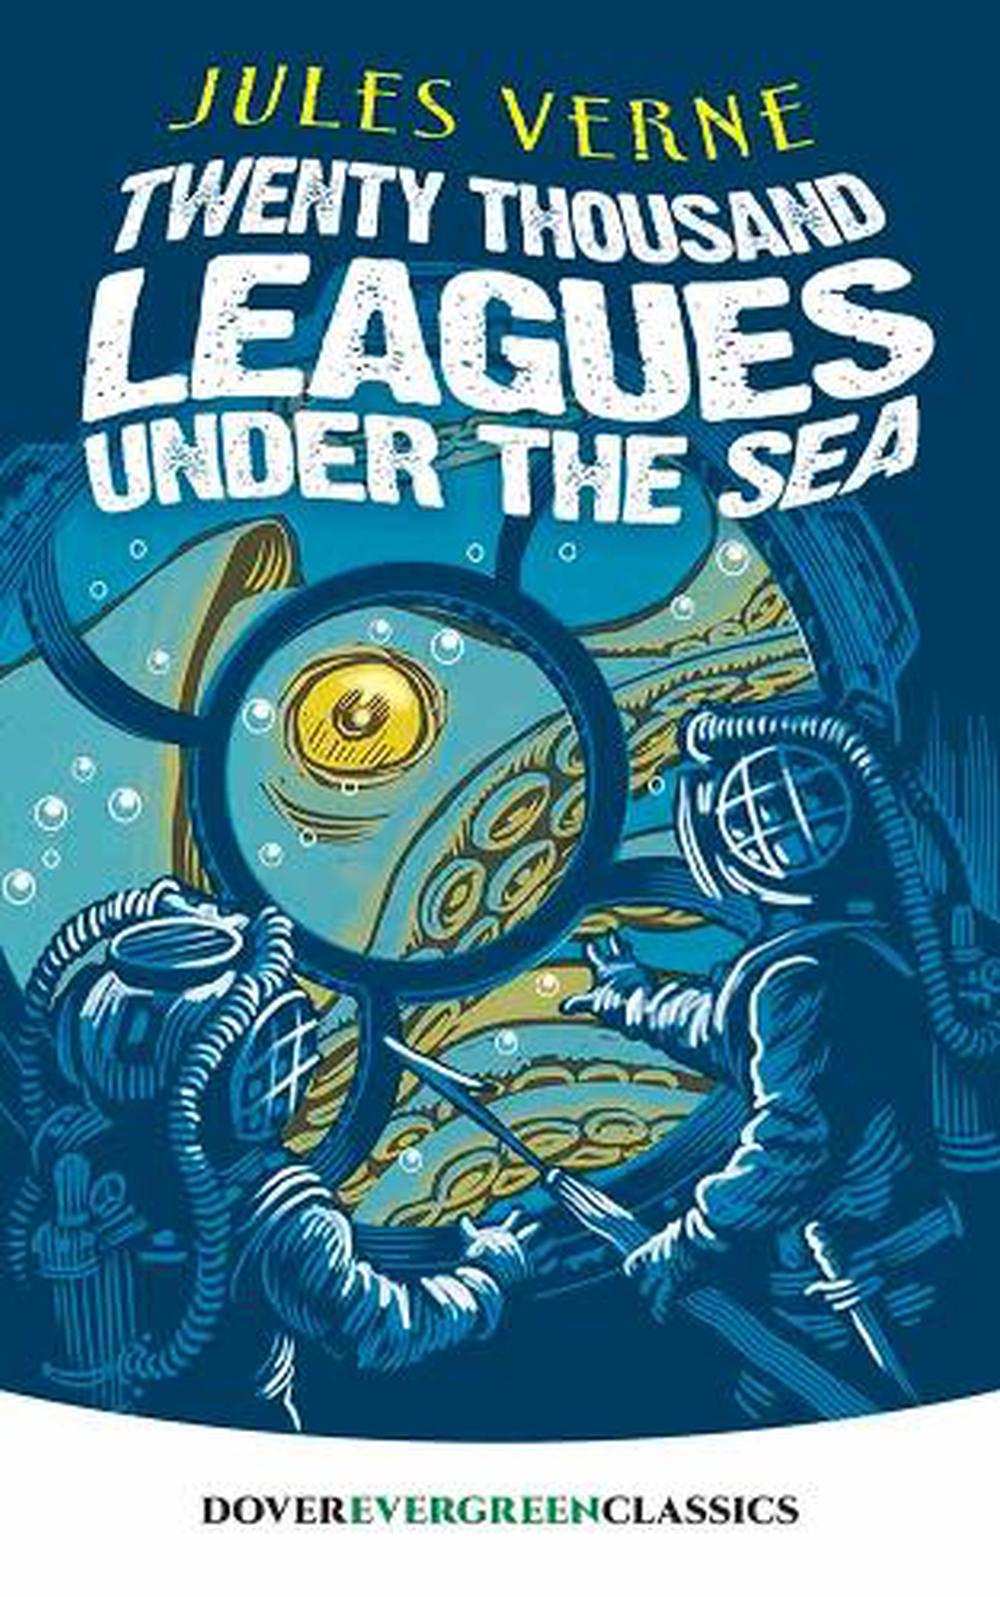 10 thousand leagues under the sea